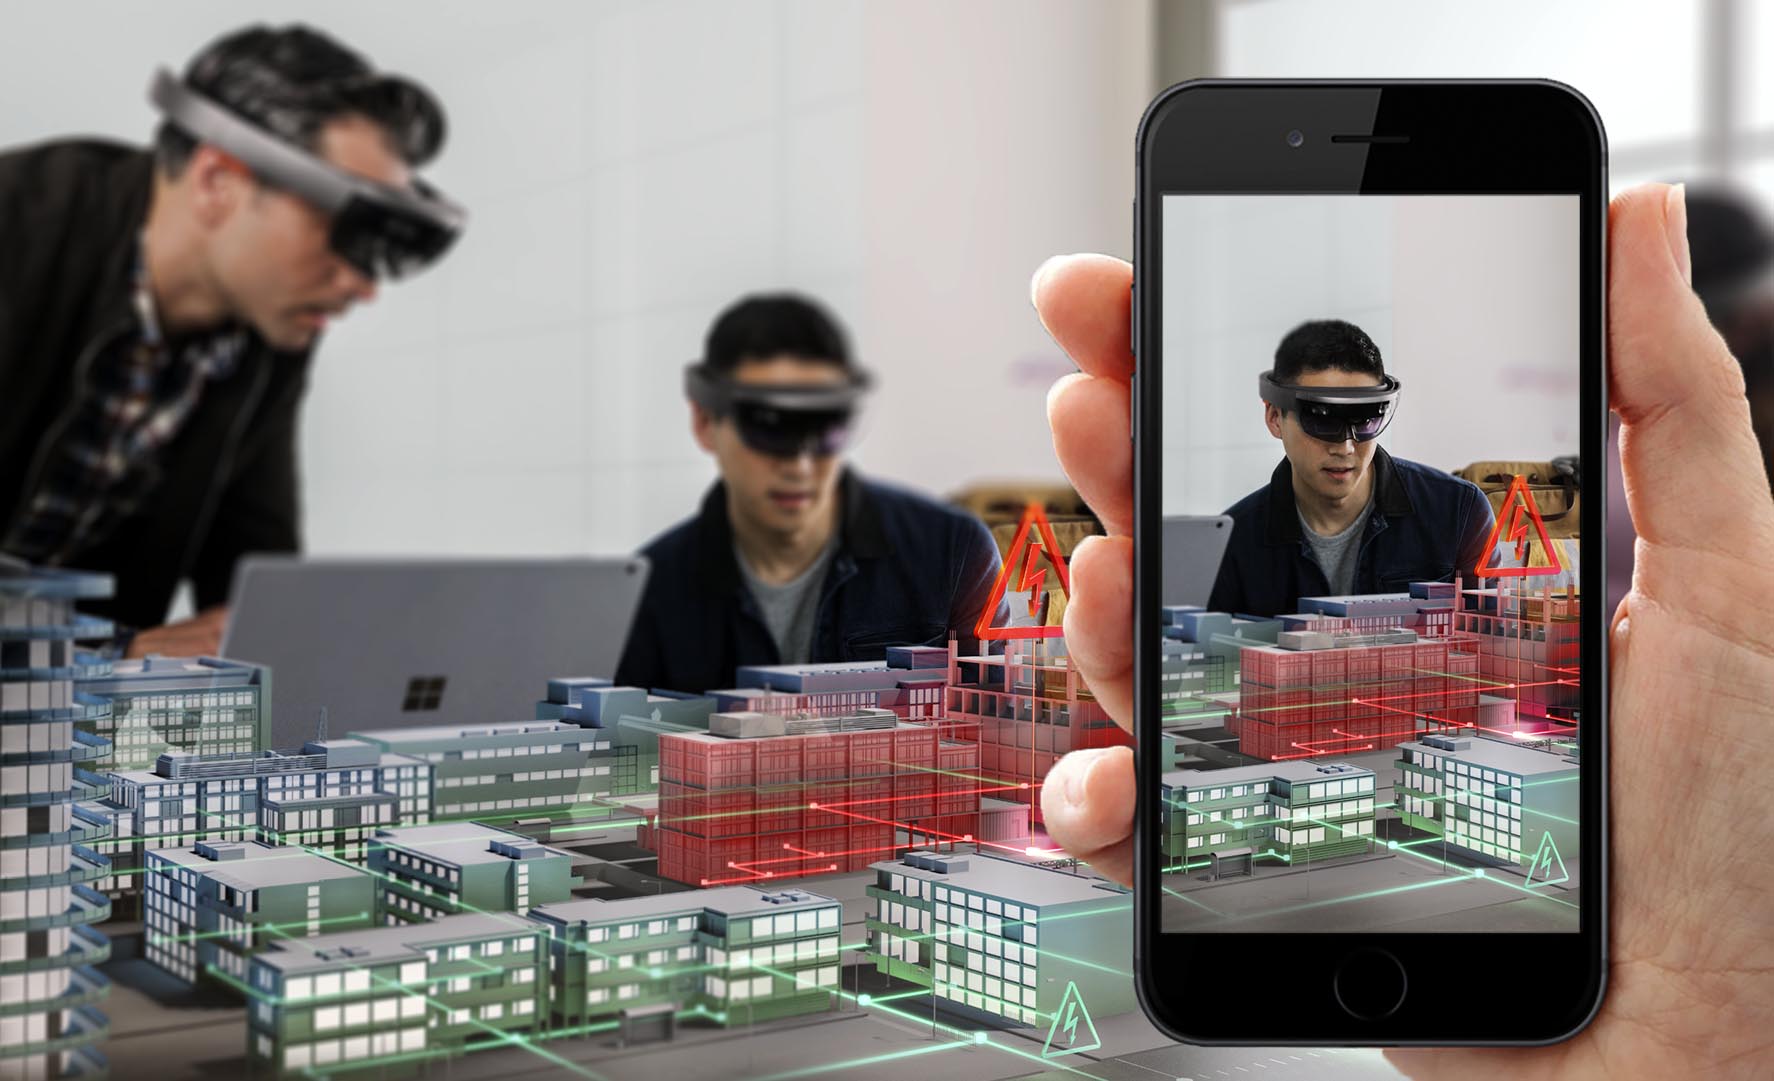 Viewing holograms in the HoloLens 2 and a smartphone